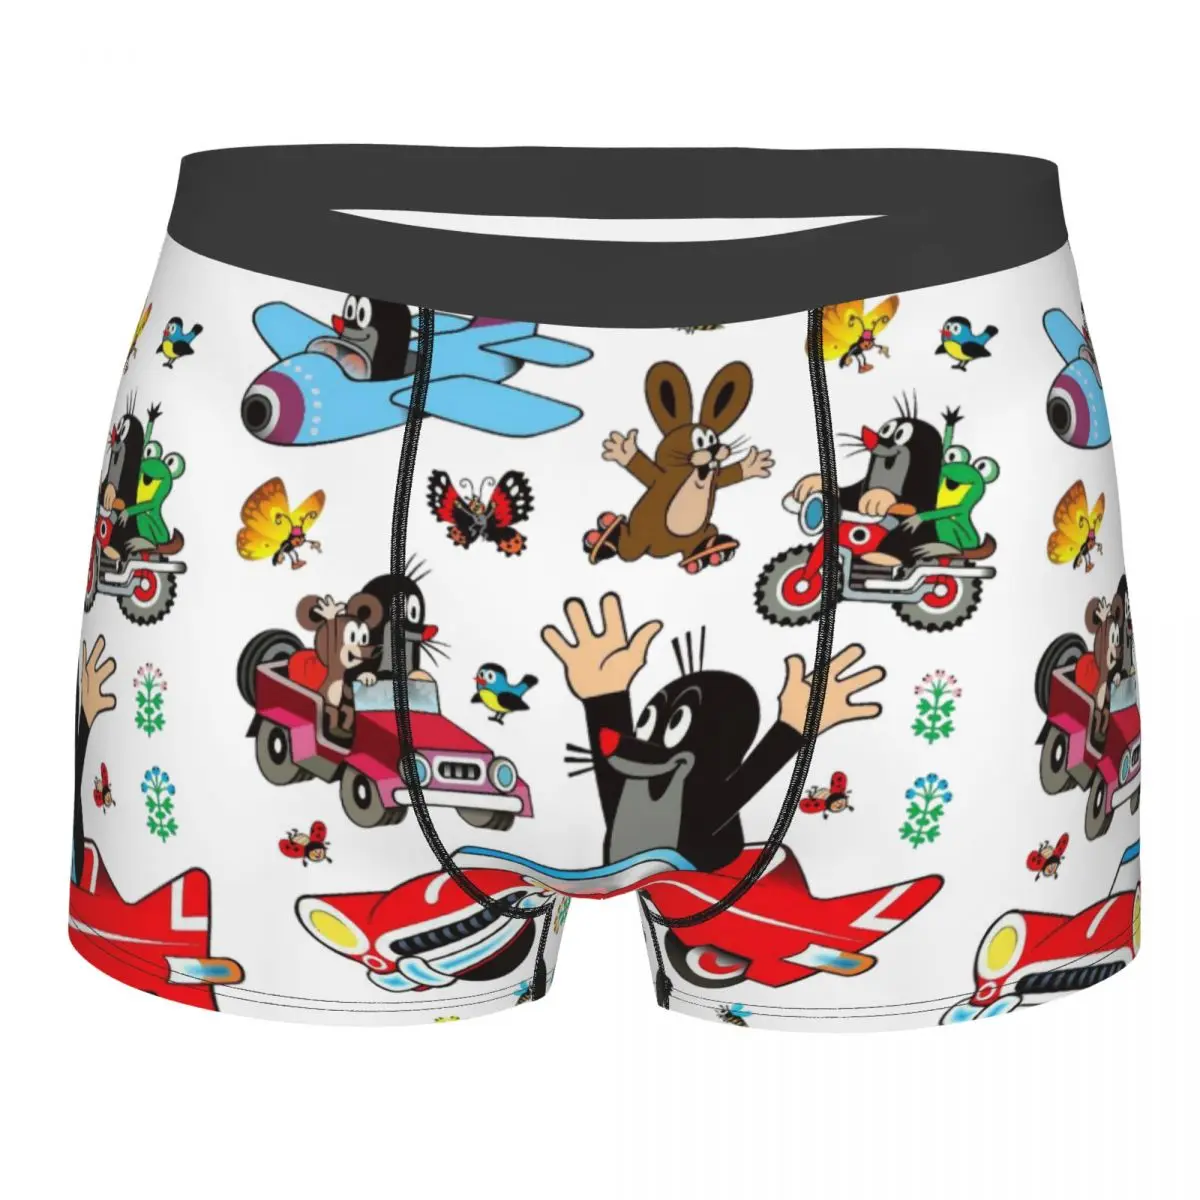 Krtek Little Maulwurf Mencosy Boxer Briefs,3D printing Underwear, Highly Breathable Top Quality Gift Idea kevin s famous chili men underwear highly breathable top quality gift idea